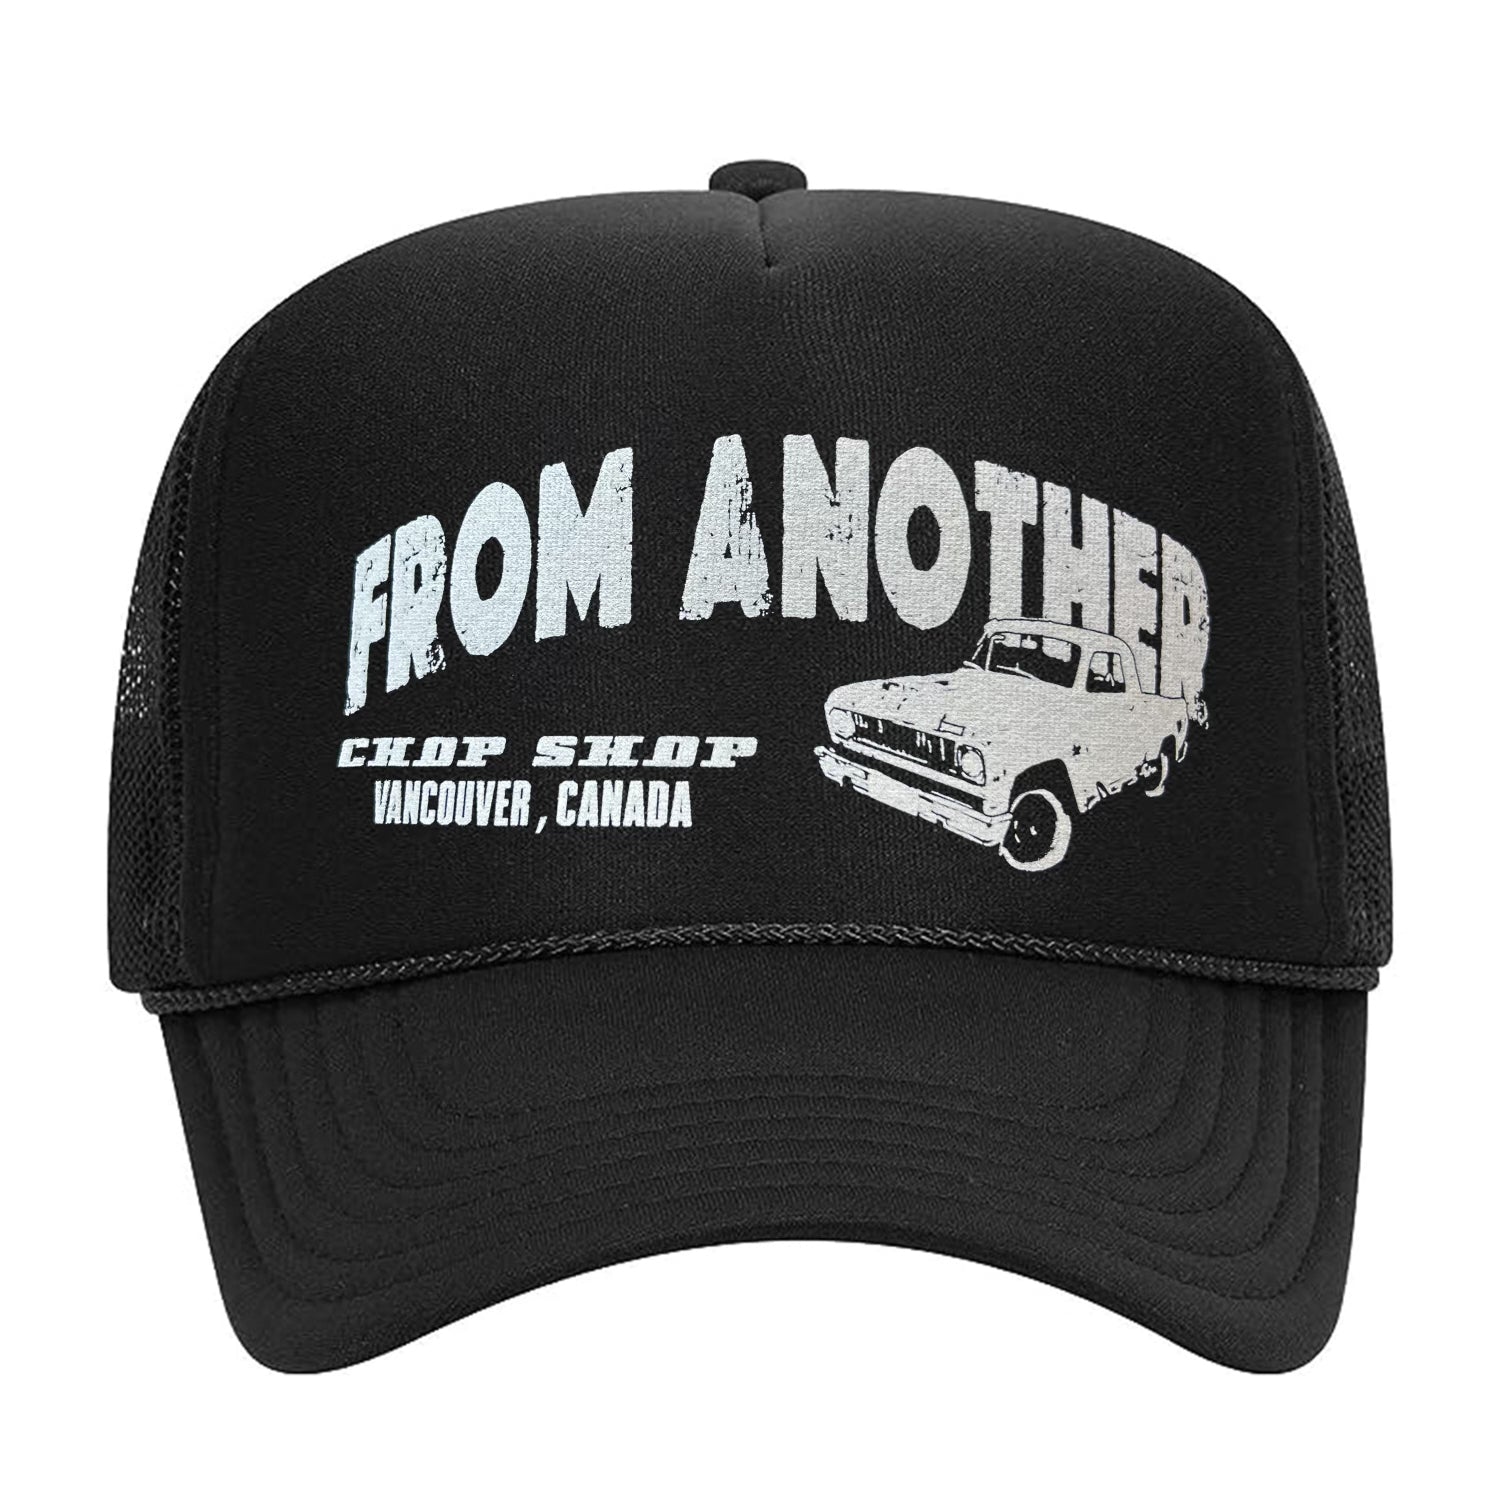 From Another Chop Shop Vancouver Trucker